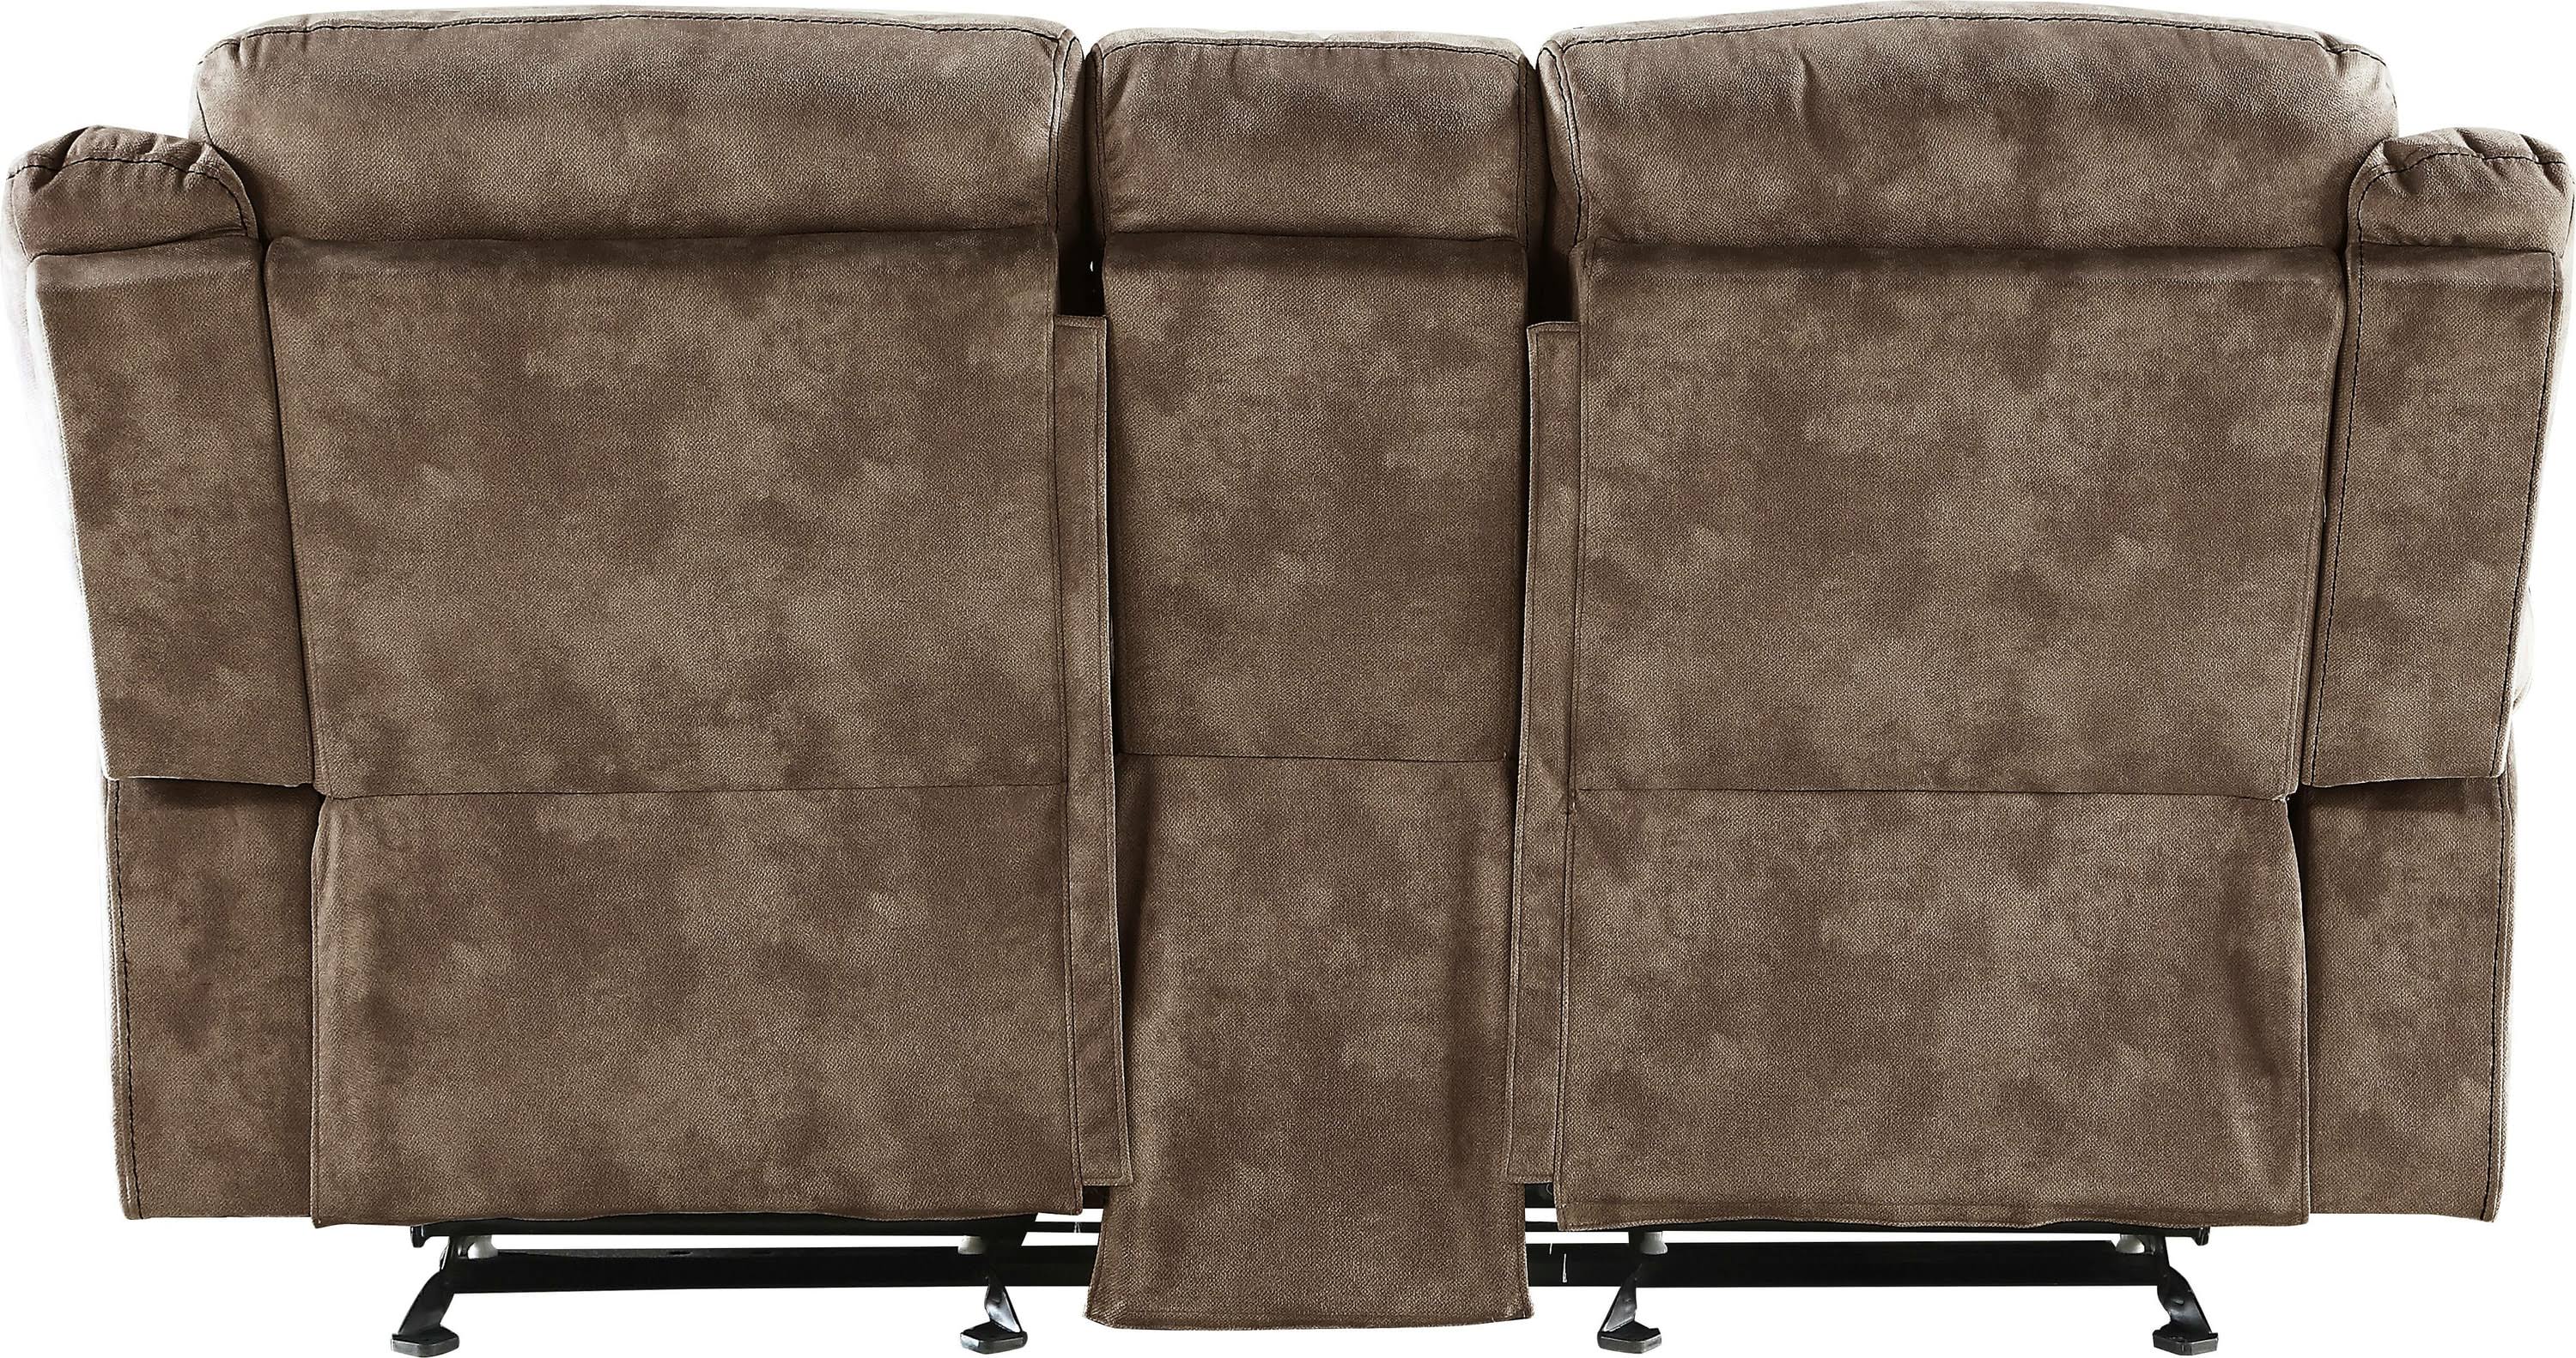 Two Tone Chocolate Reclining Loveseat Back